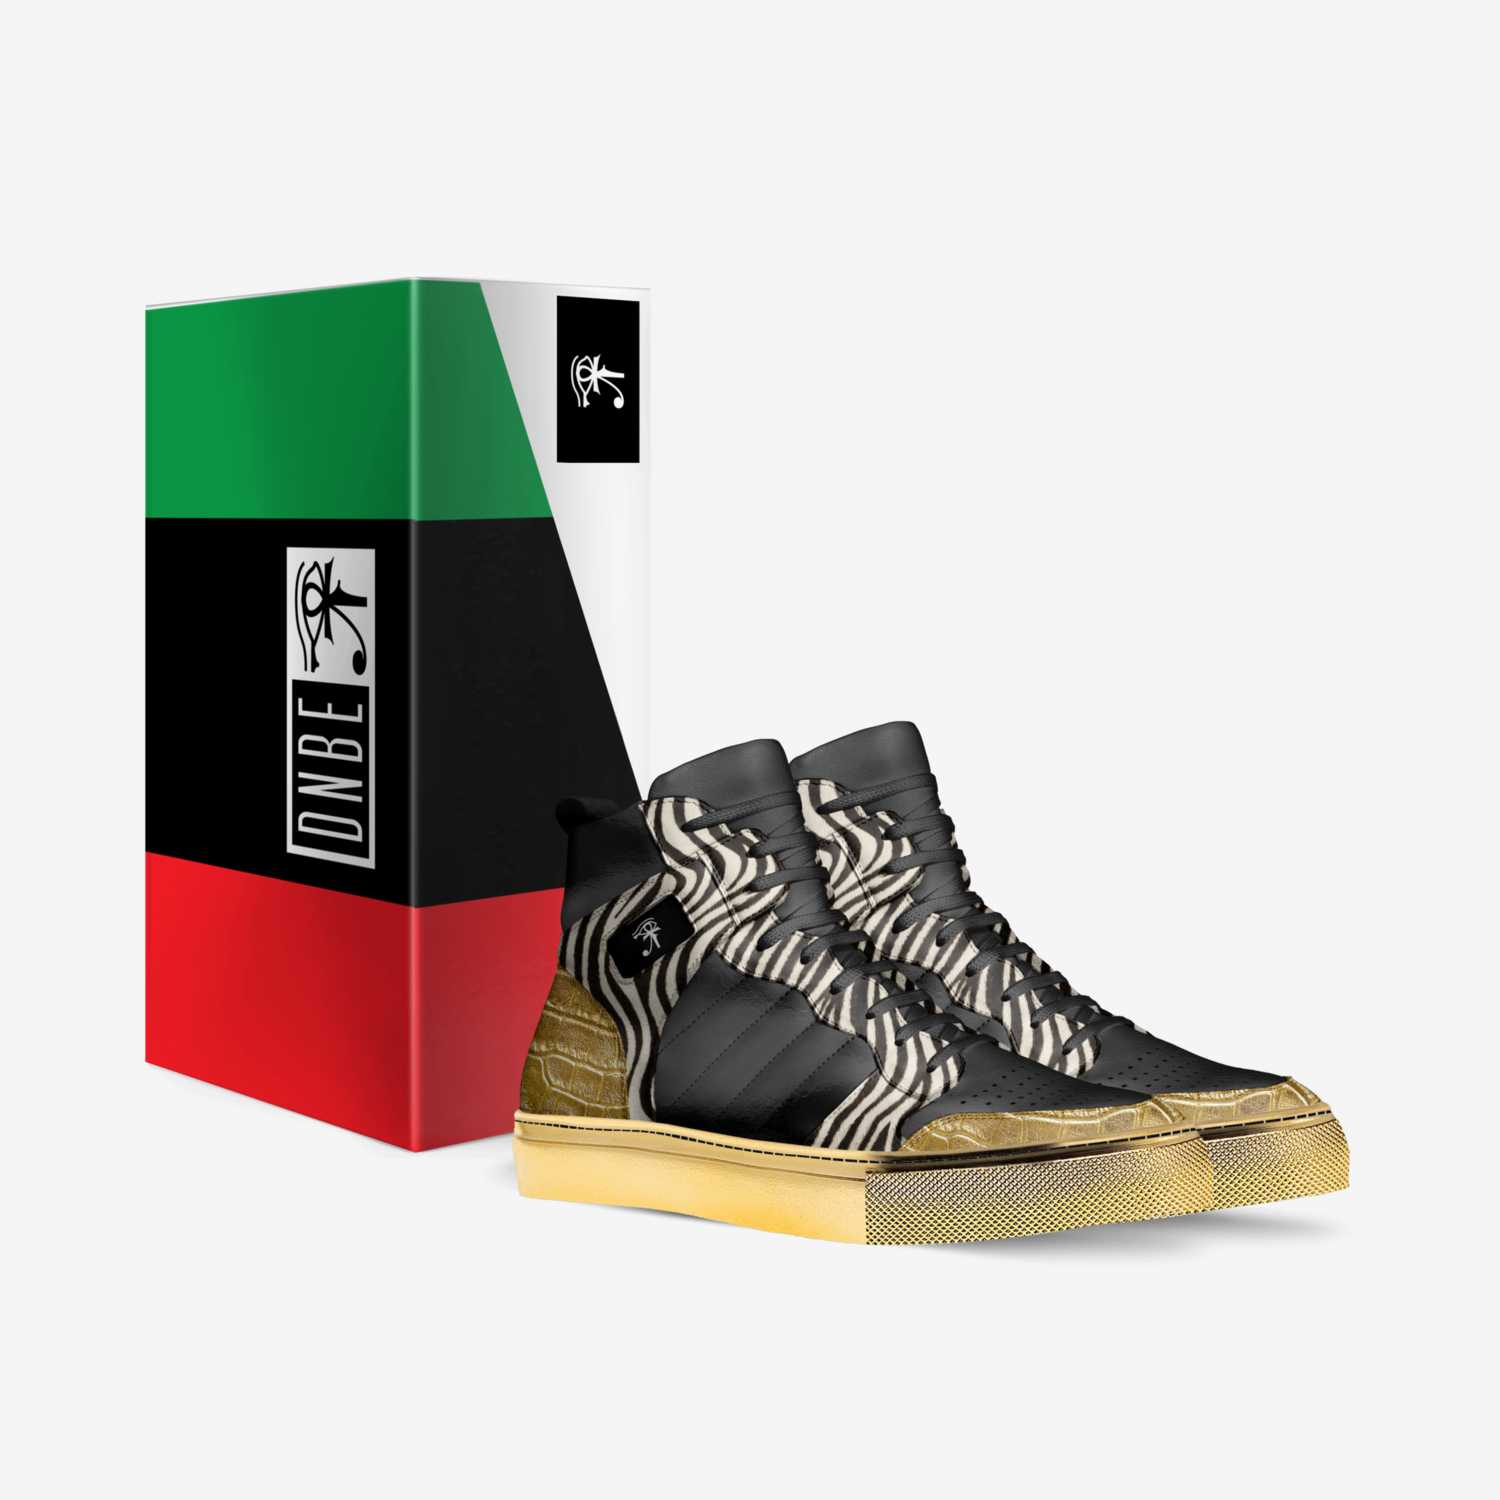 Mansa Musa custom made in Italy shoes by Dnbe Apparel | Box view